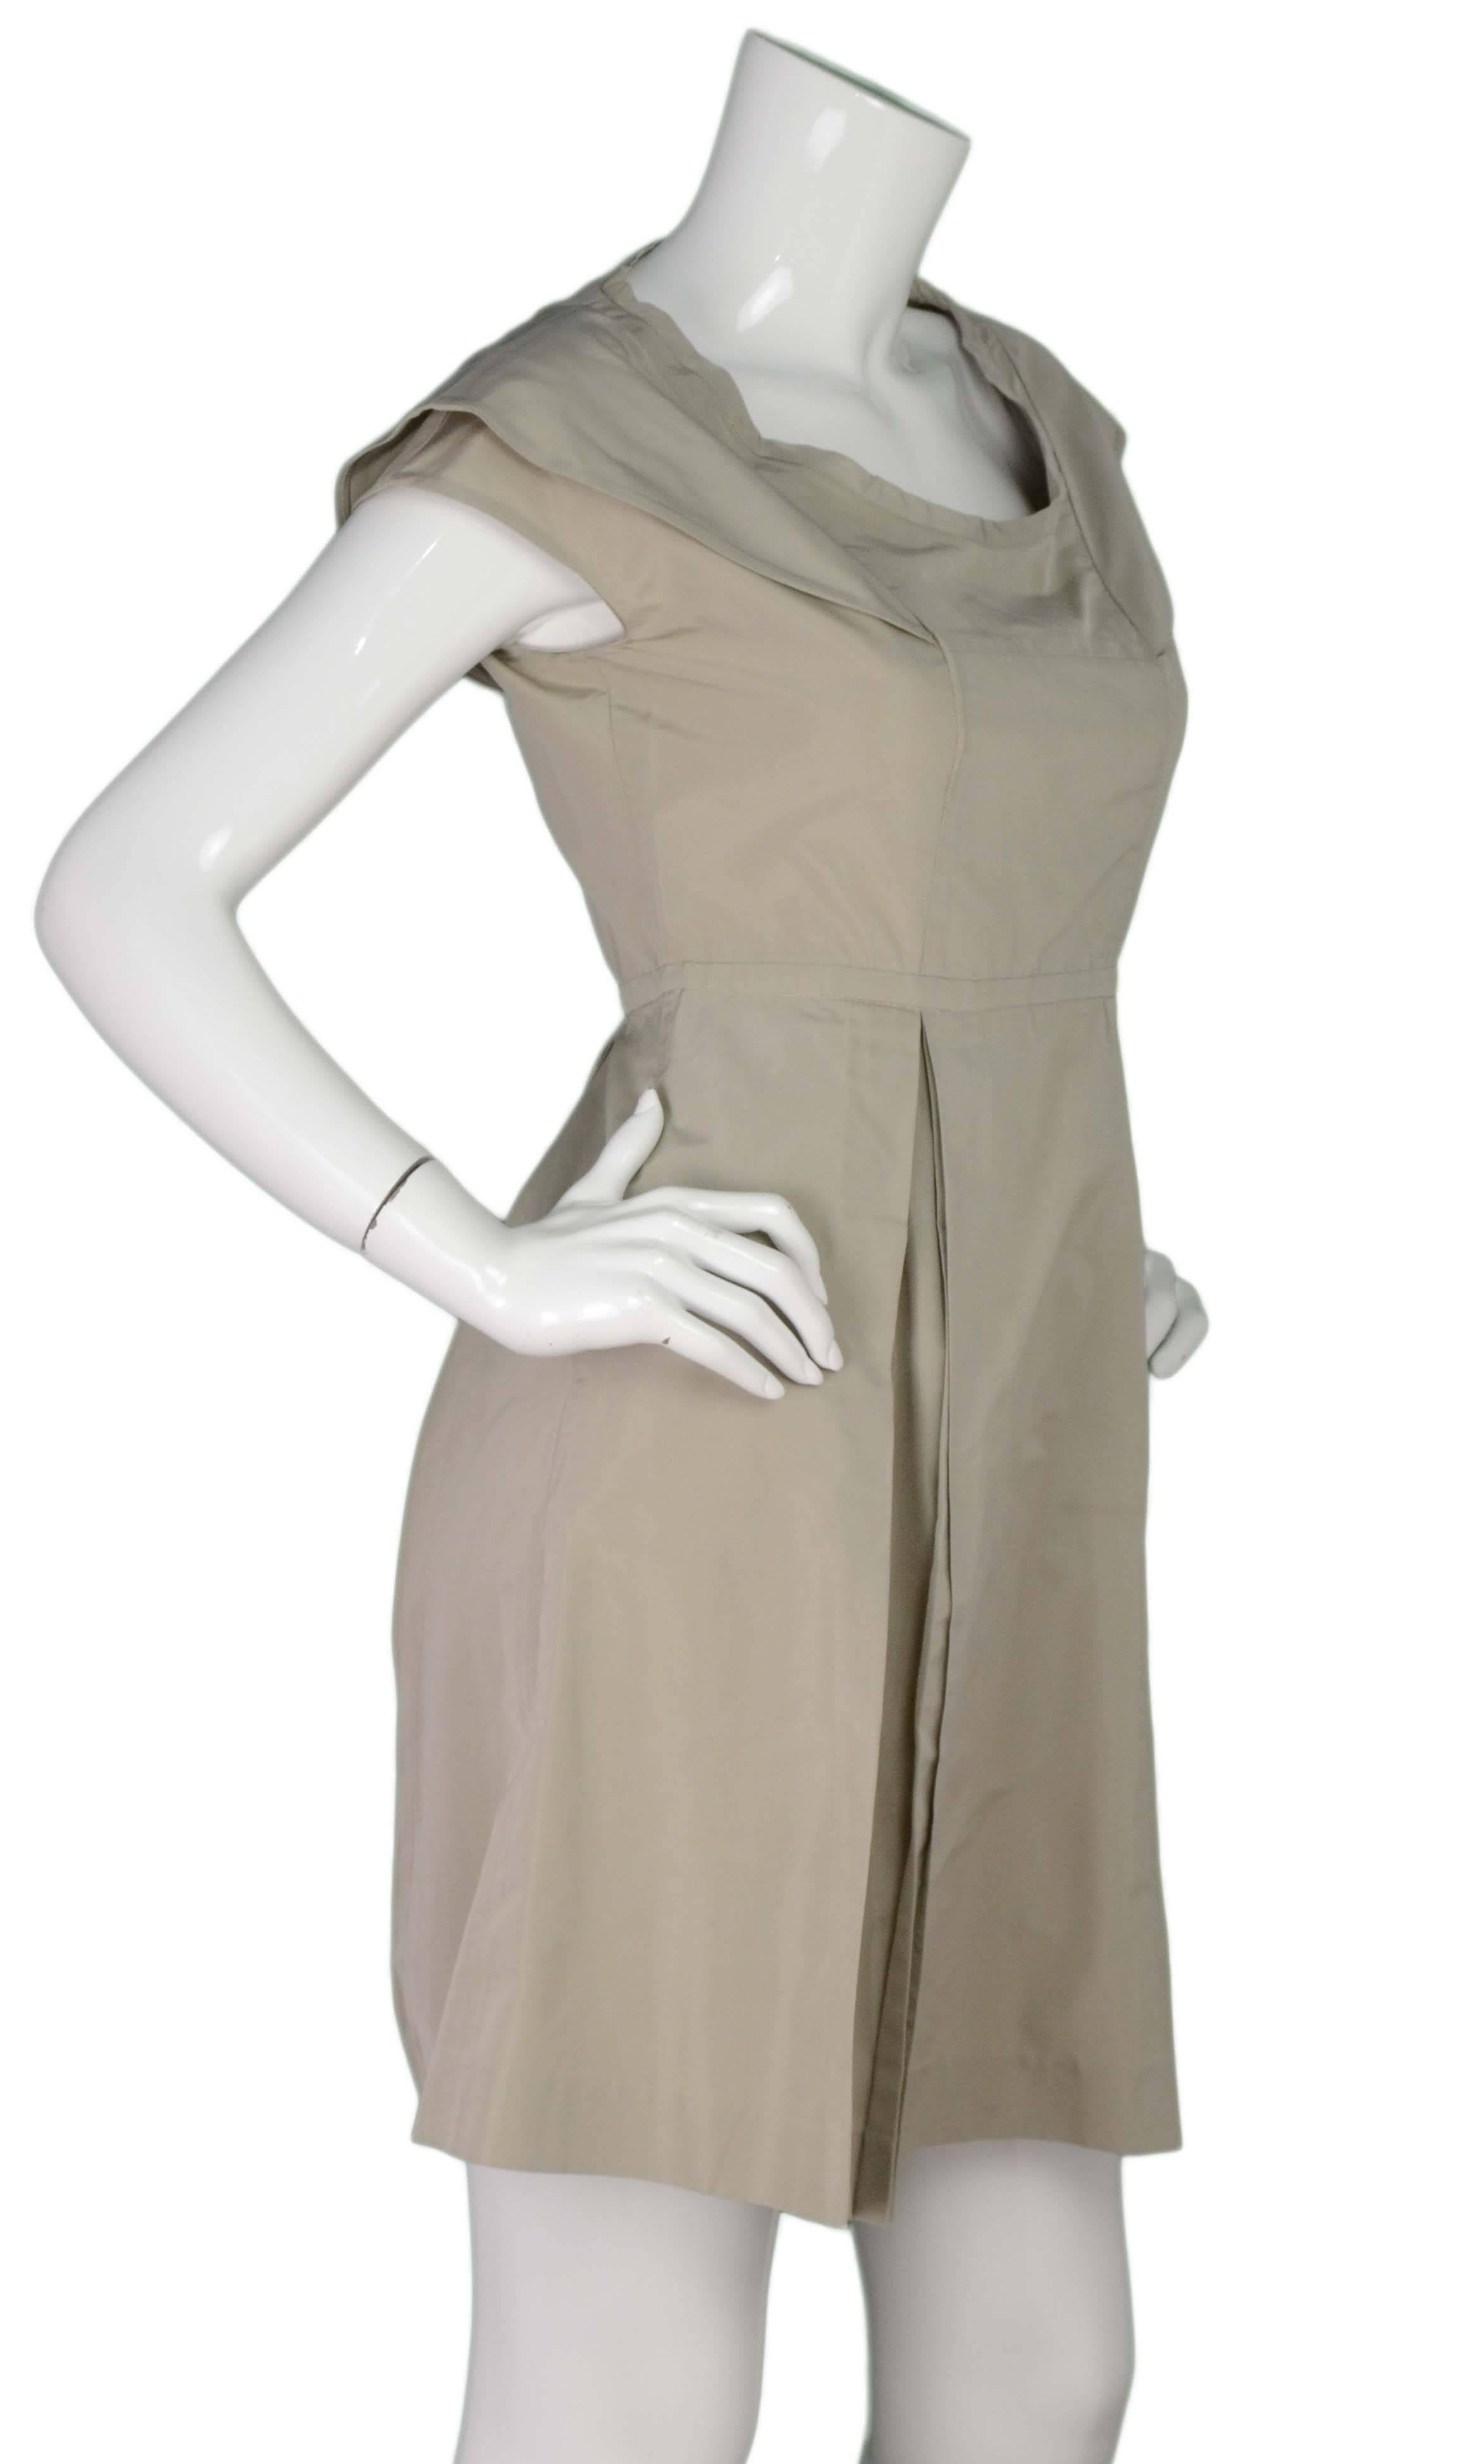 Miu Miu Beige Pleated Cap-Sleeve Dress 
Features double layered cap-sleeves and a scoop neckline
Made In: Italy
Color: Beige
Composition: 55% Polyester, 45% acetate
Lining: None
Closure/Opening: Side zipper
Exterior Pockets: Two hip